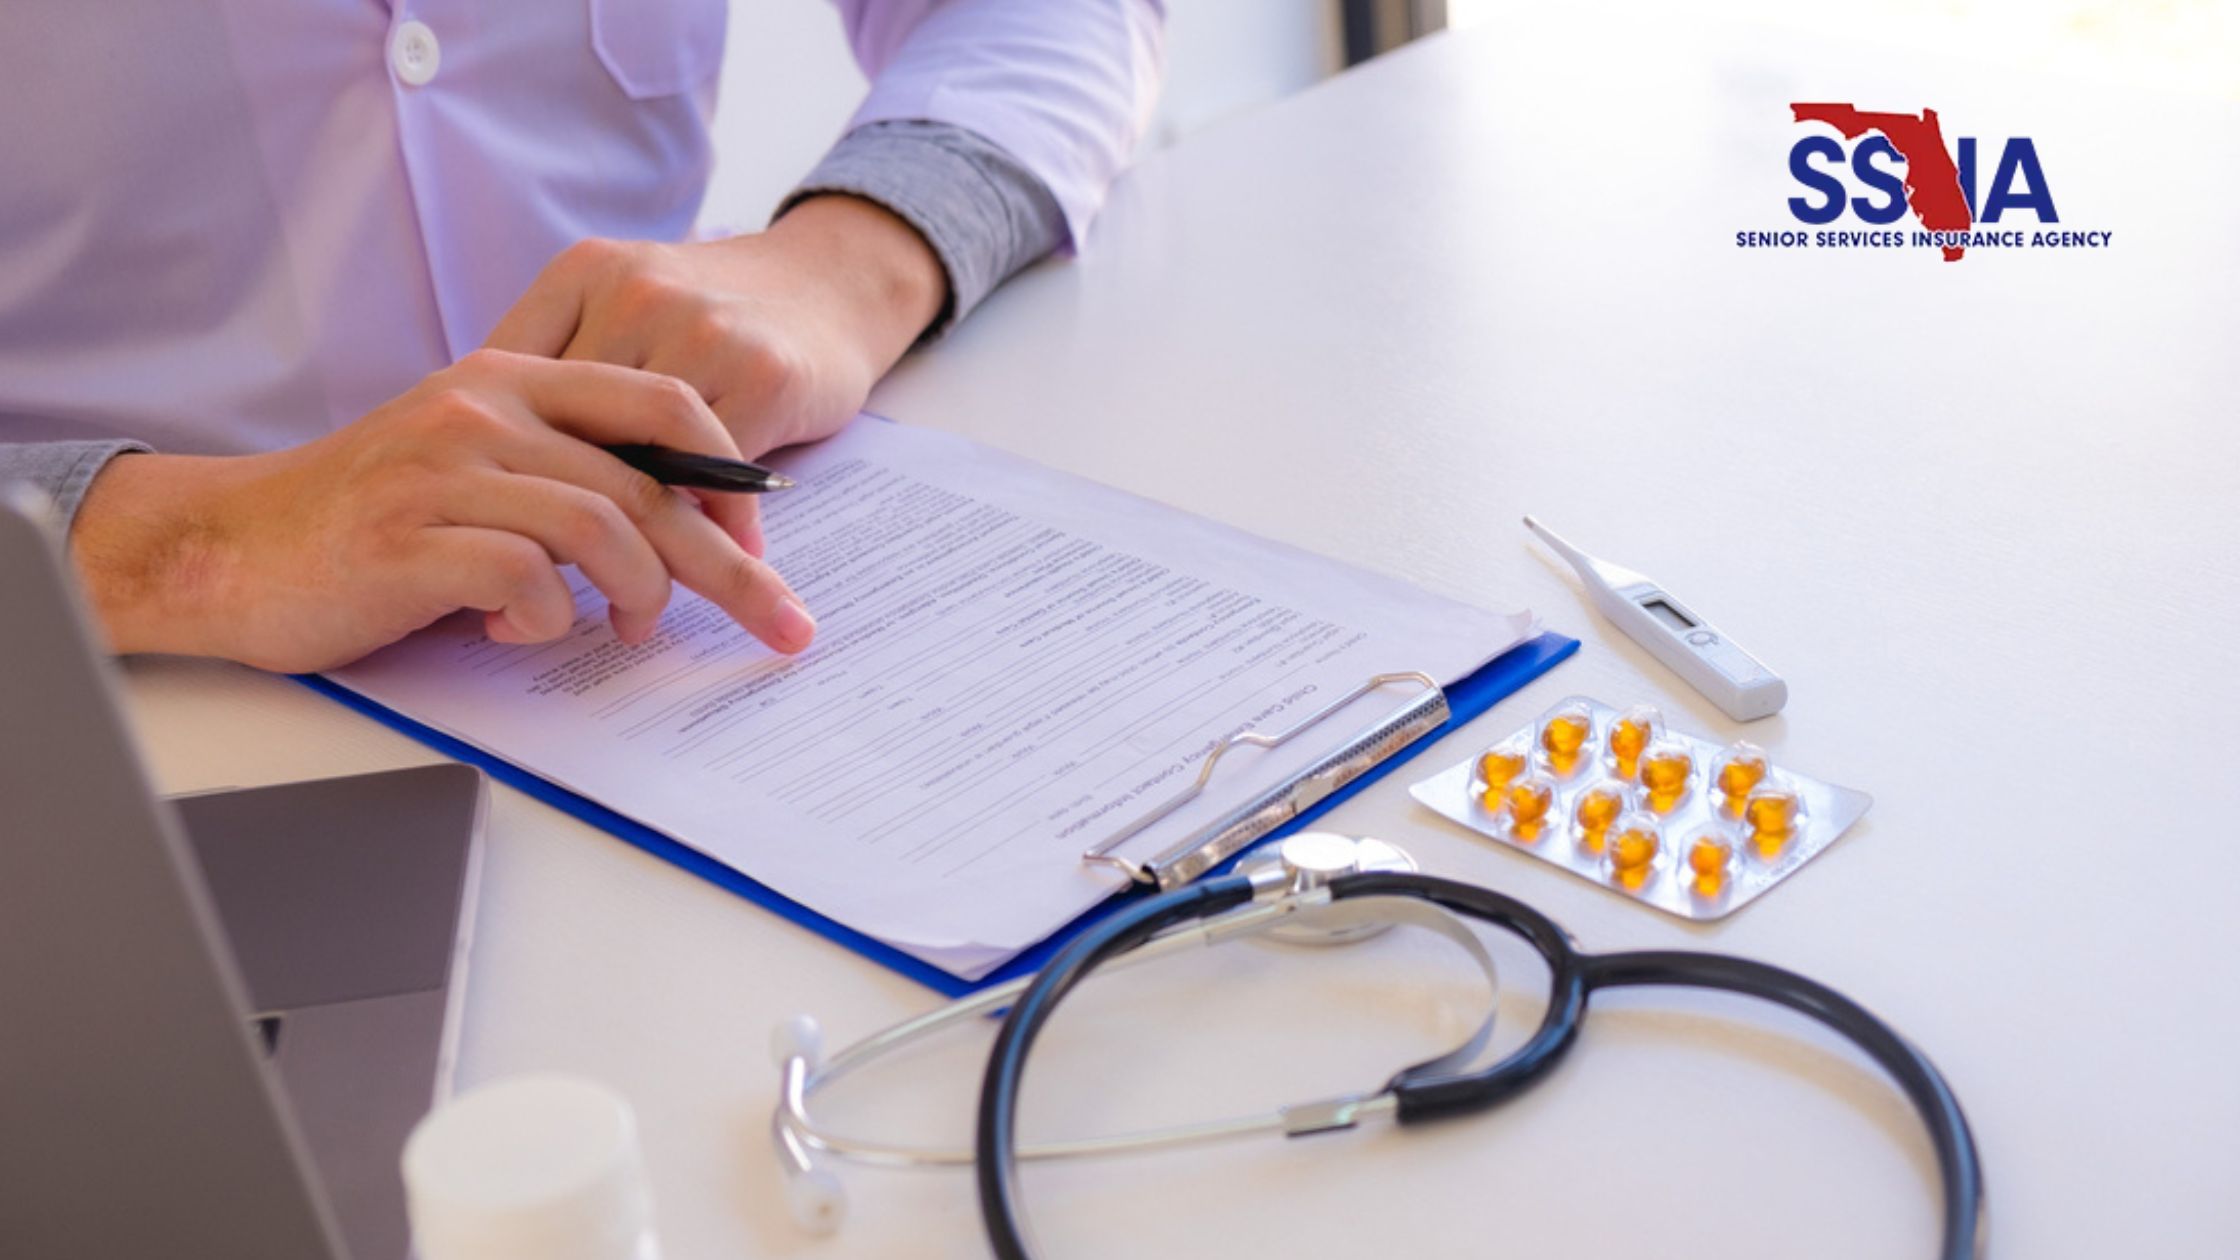 Find Your Perfect Match: 5 Steps to Choosing a Medicare Prescription Drug Plan